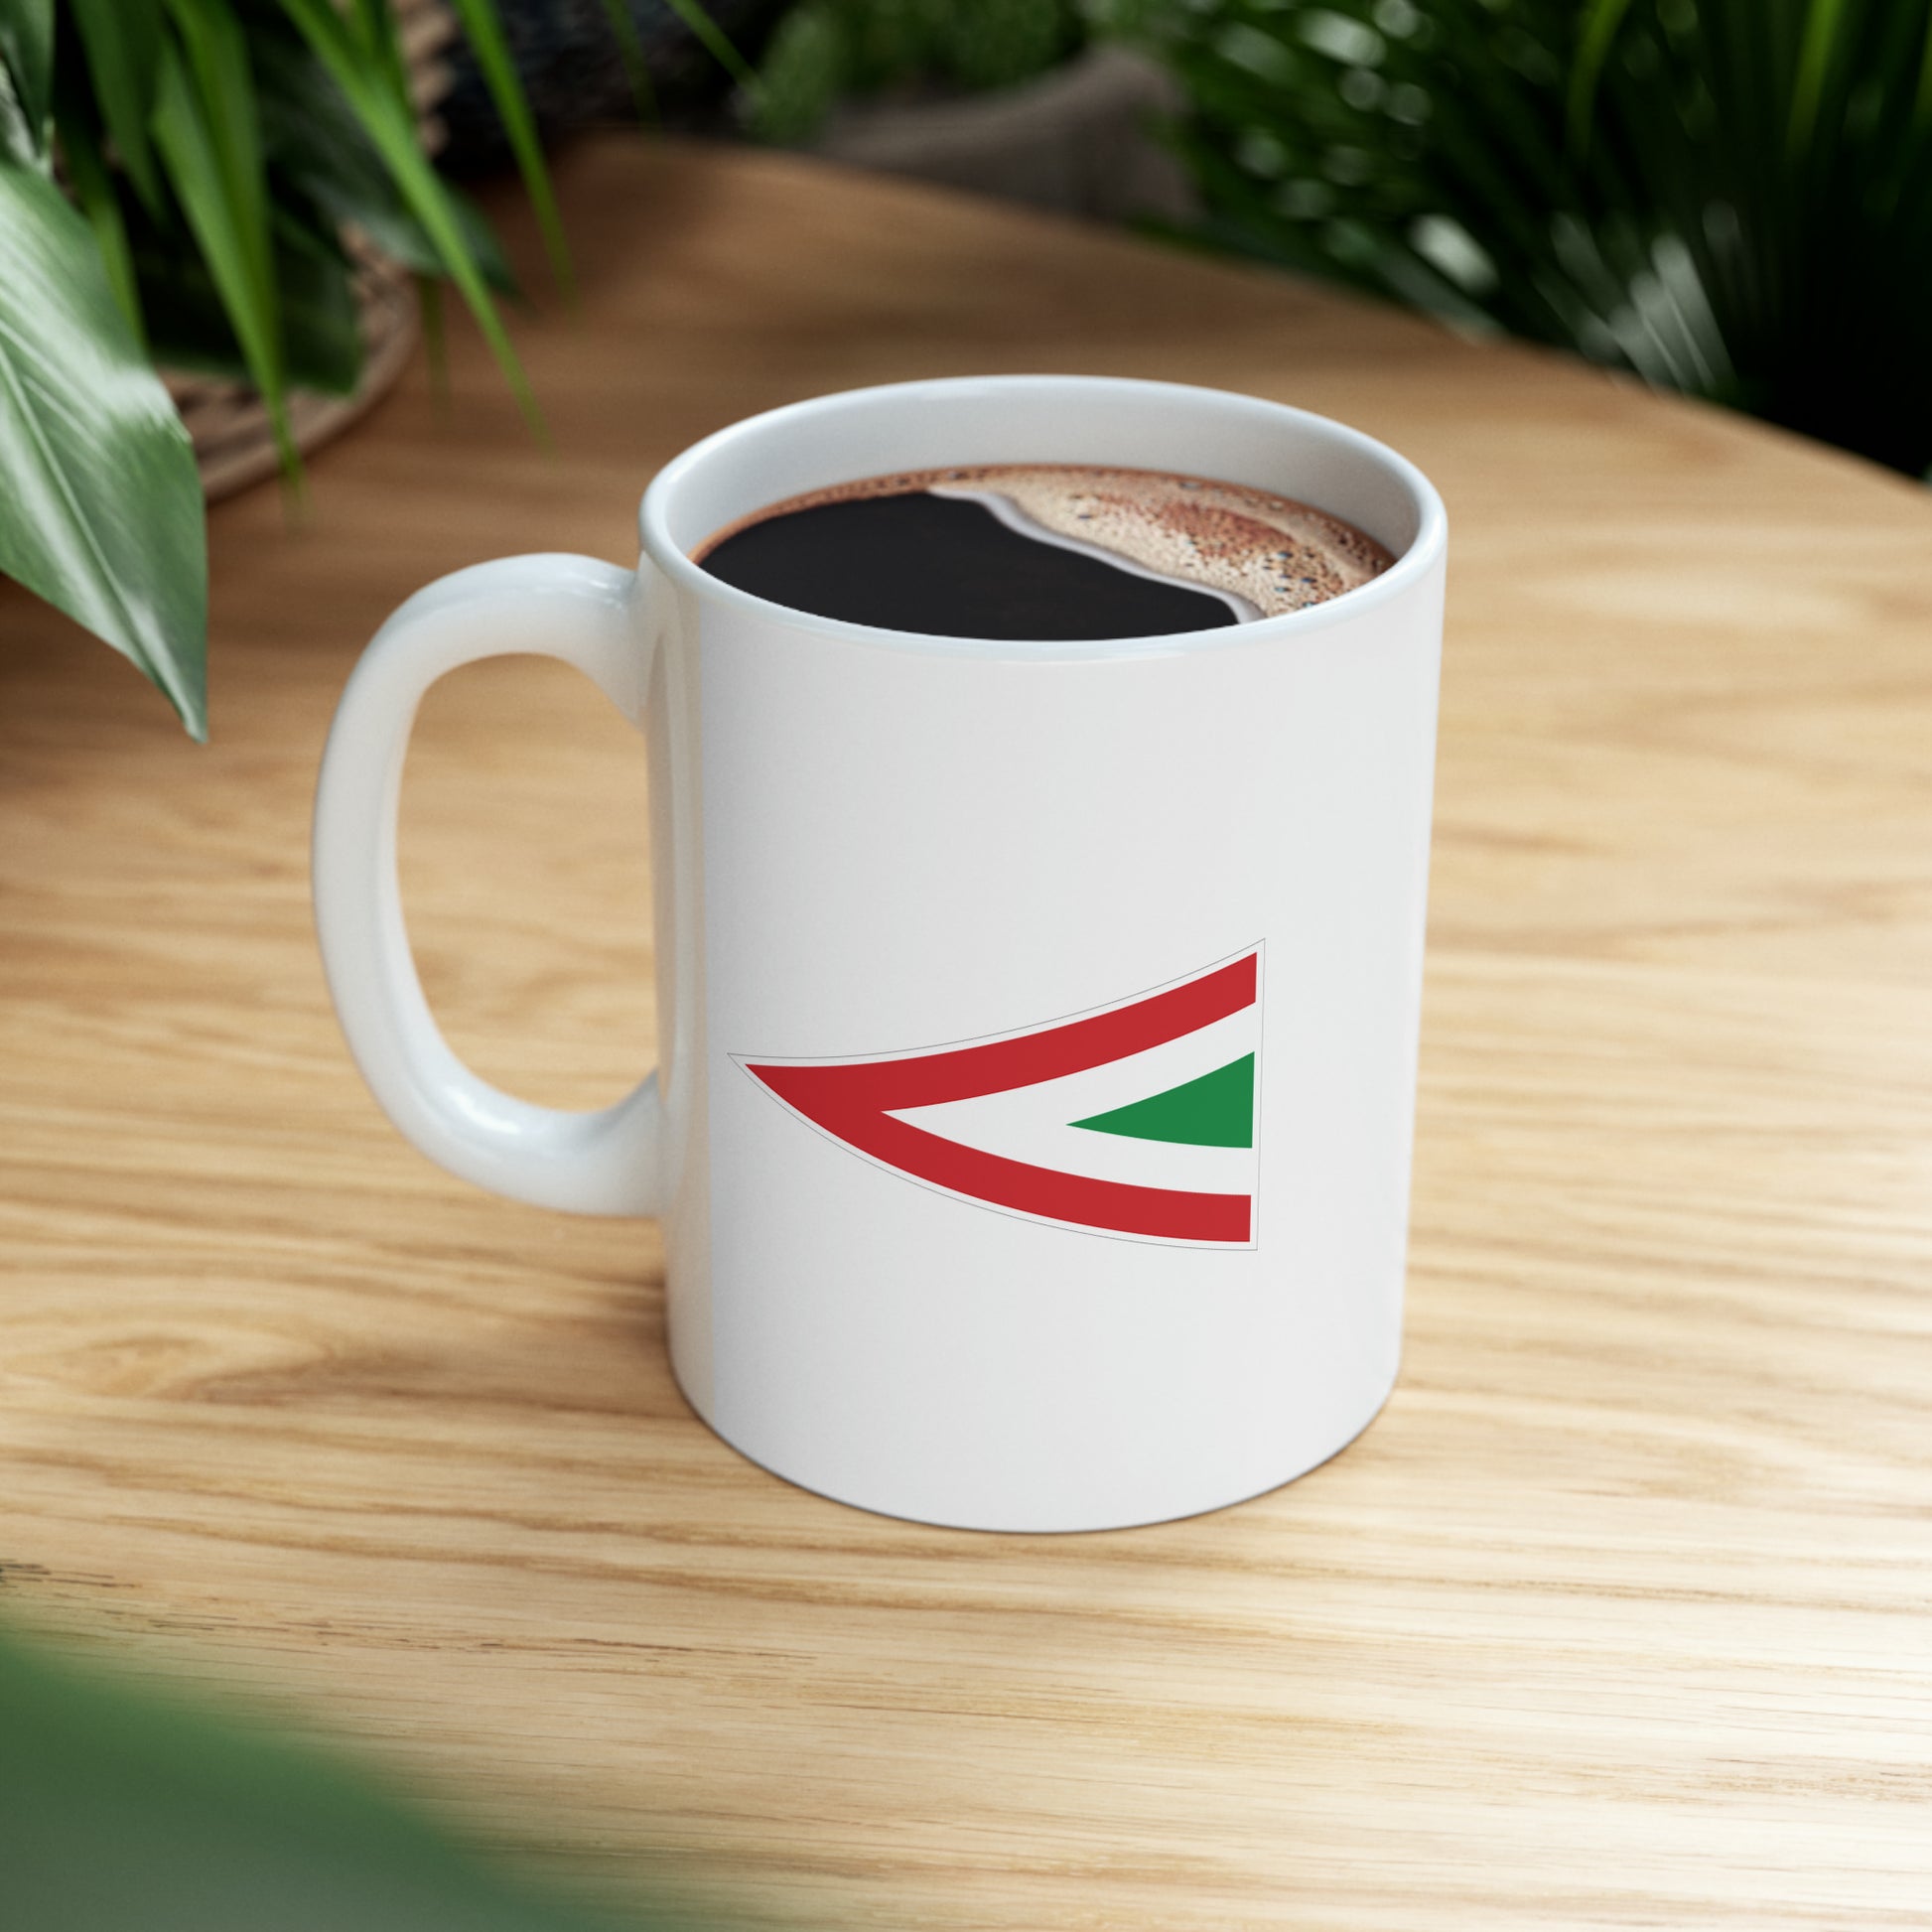 Hungarian Air Force Roundel Coffee Mug - Double Sided White Ceramic 11oz - By TheGlassyLass.com